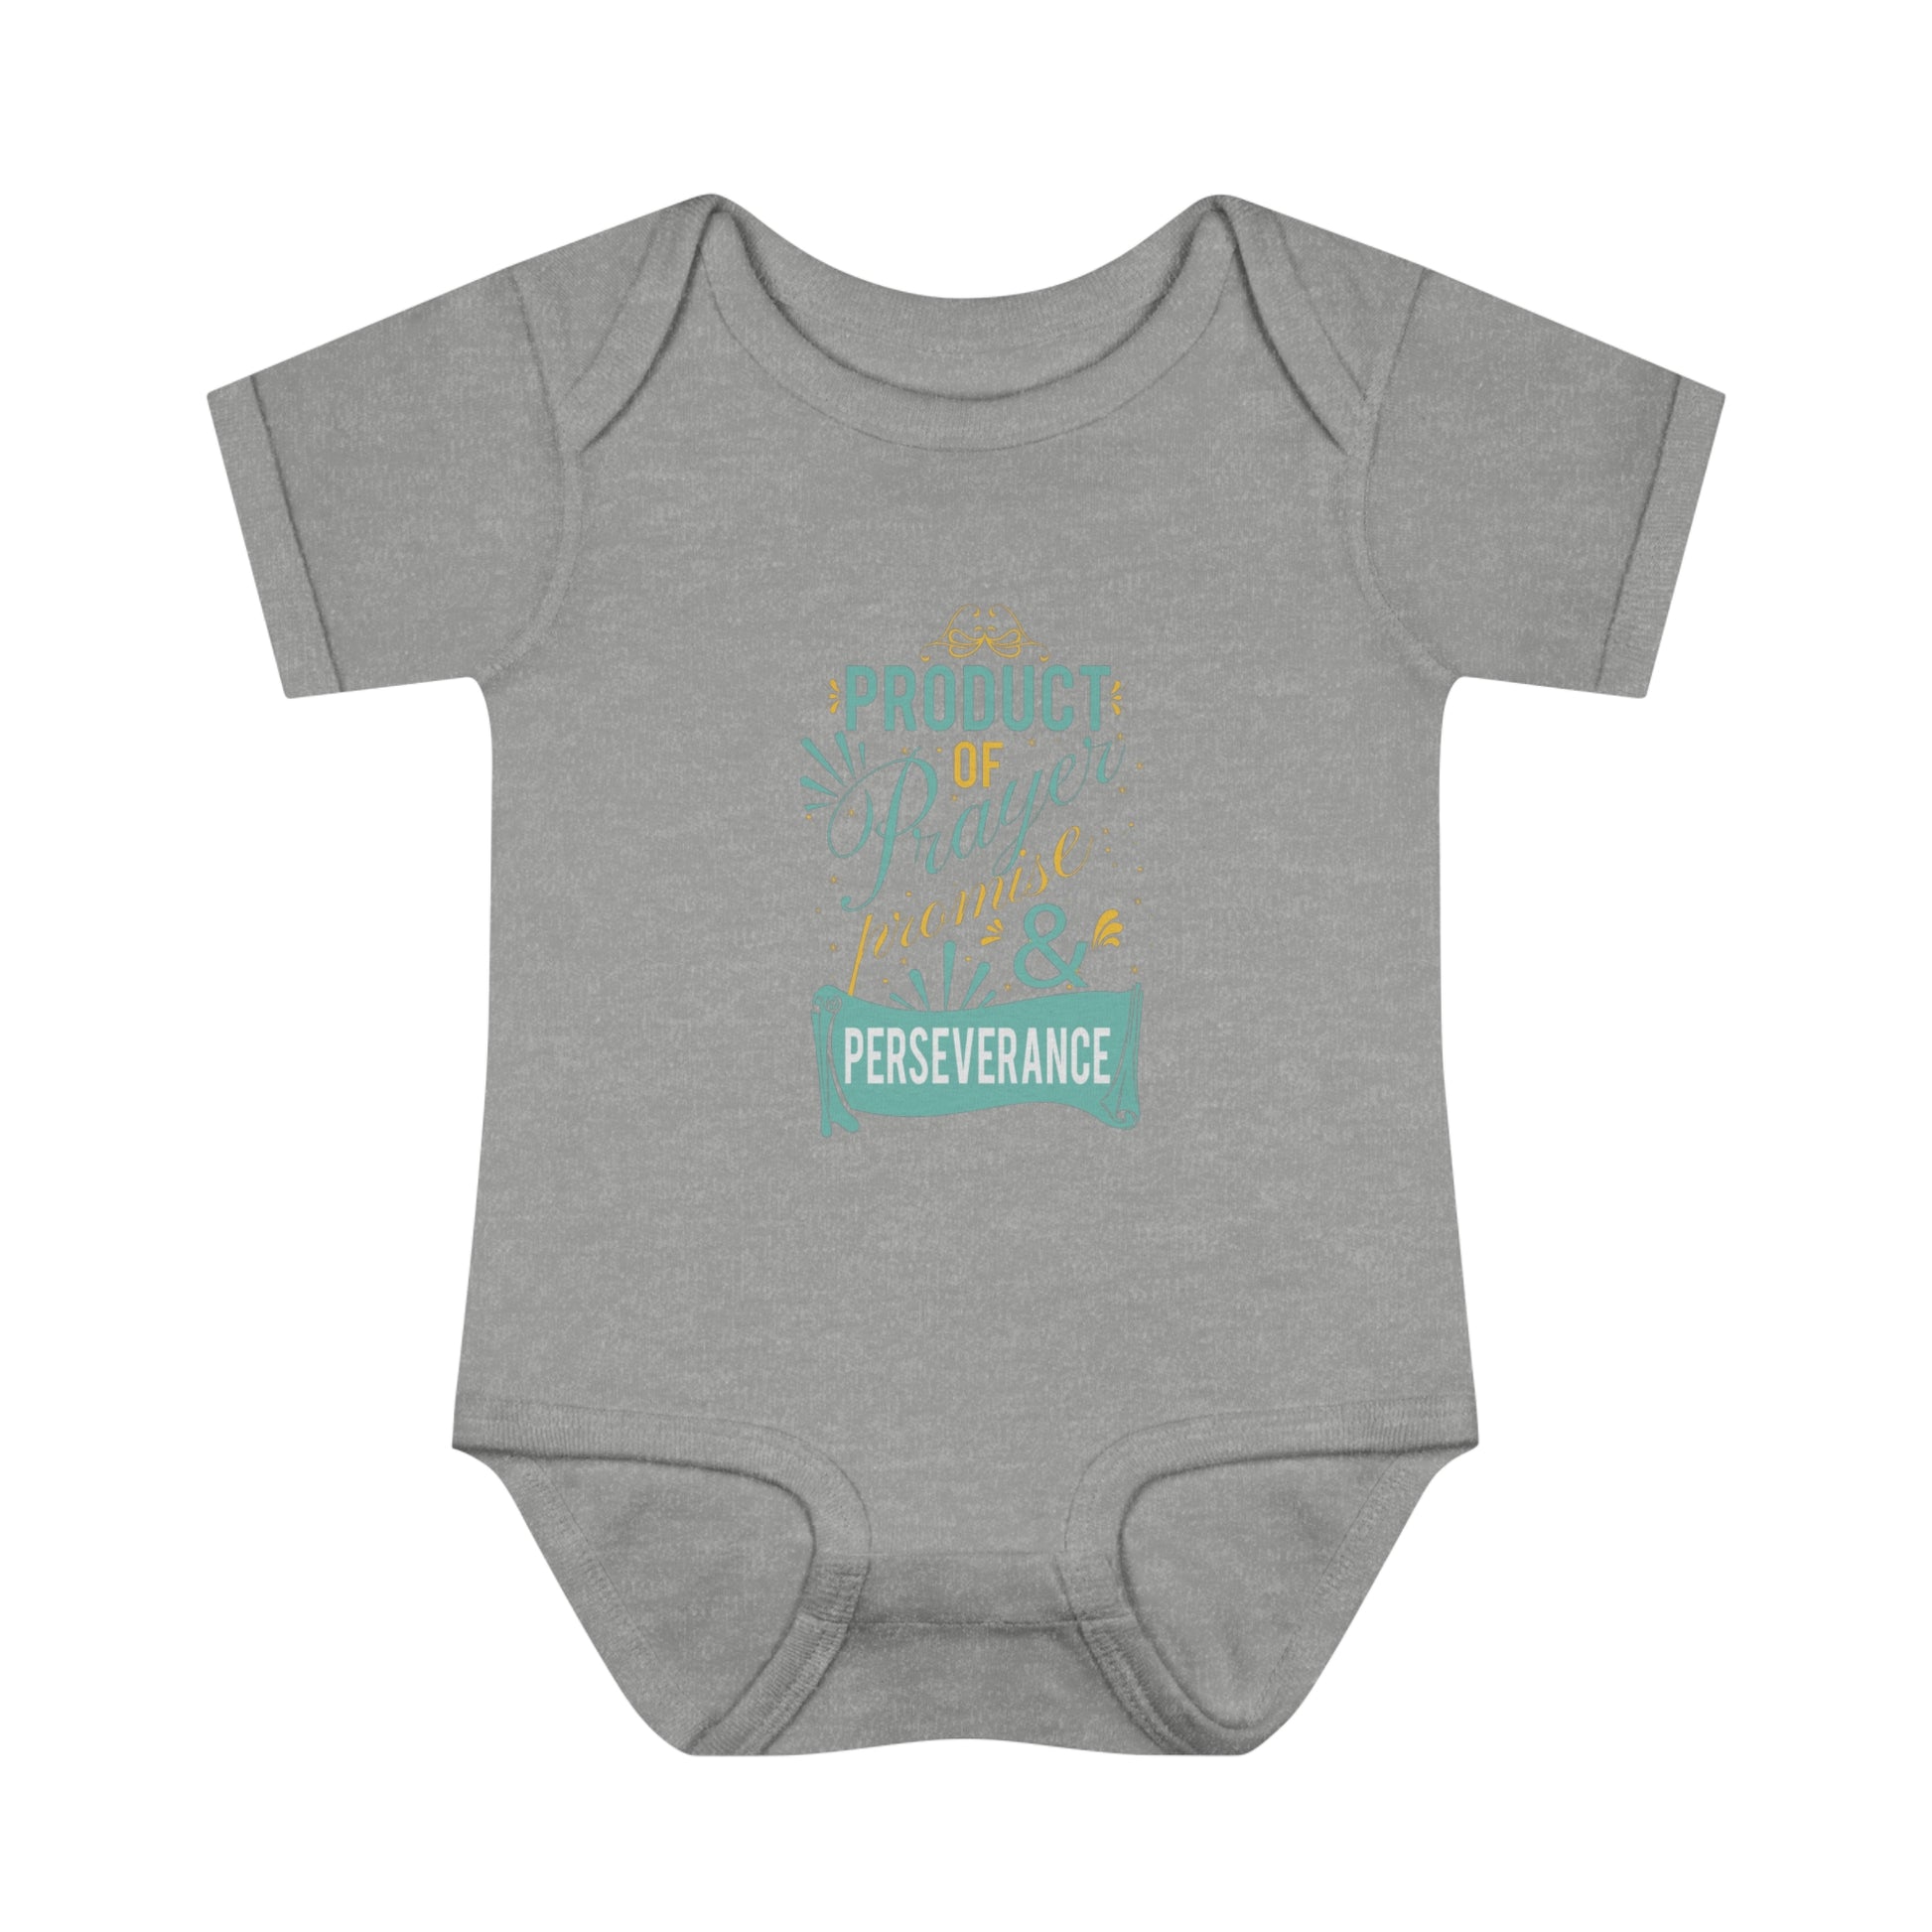 Product Of Prayer Promise & Perseverance Christian Baby Onesie Printify